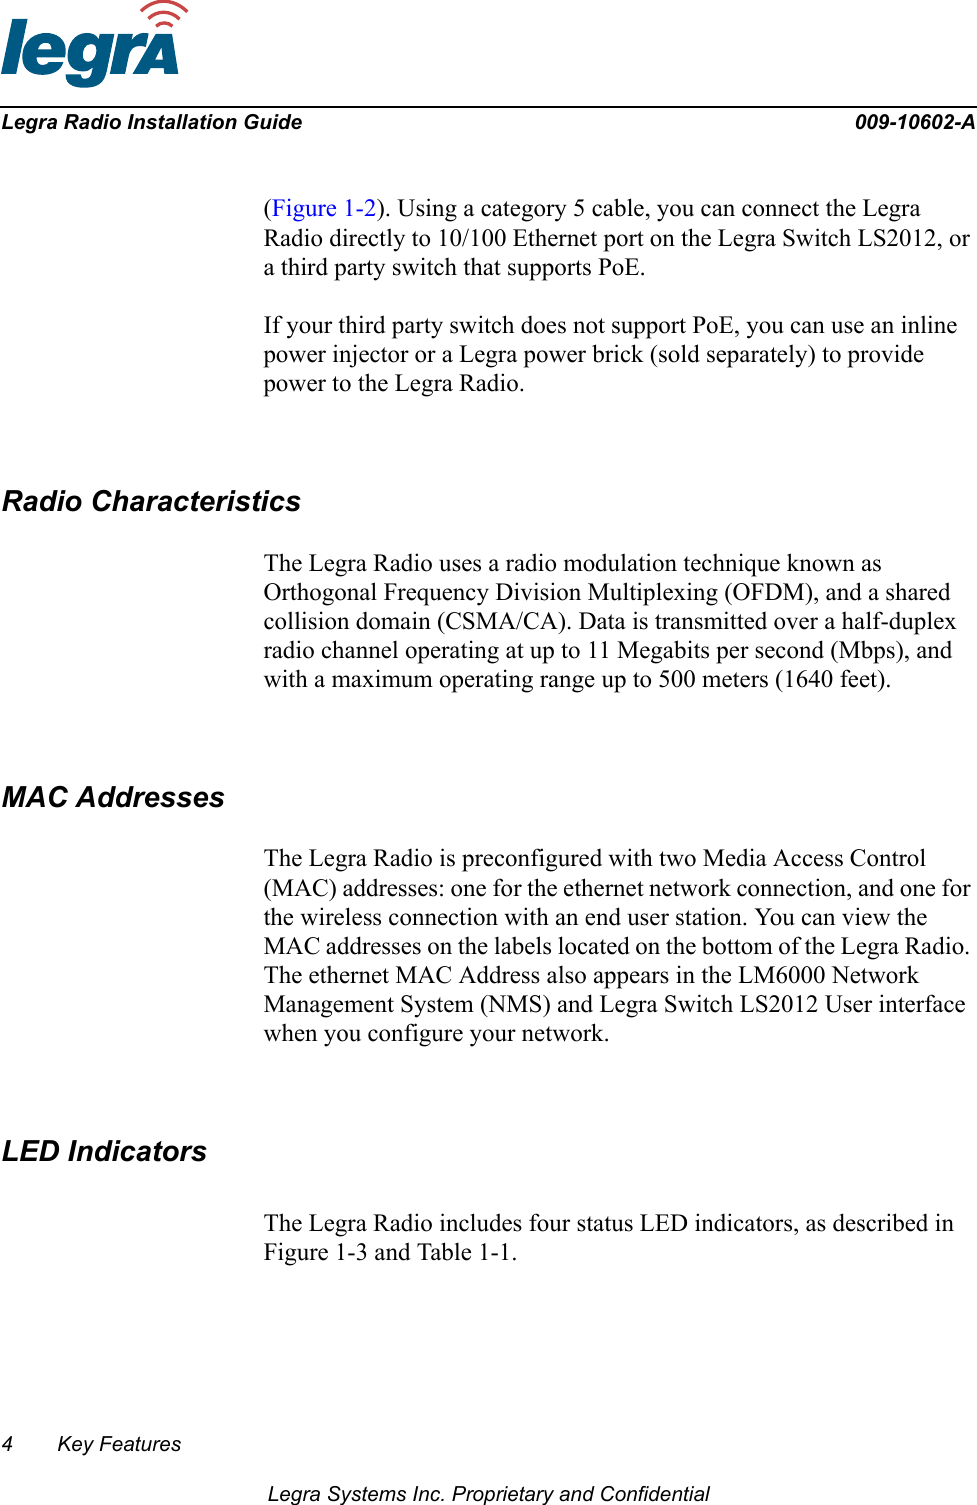 4 Key FeaturesLegra Systems Inc. Proprietary and ConfidentialLegra Radio Installation Guide 009-10602-A(Figure 1-2). Using a category 5 cable, you can connect the Legra Radio directly to 10/100 Ethernet port on the Legra Switch LS2012, or a third party switch that supports PoE. If your third party switch does not support PoE, you can use an inline power injector or a Legra power brick (sold separately) to provide power to the Legra Radio.Radio CharacteristicsThe Legra Radio uses a radio modulation technique known as Orthogonal Frequency Division Multiplexing (OFDM), and a shared collision domain (CSMA/CA). Data is transmitted over a half-duplex radio channel operating at up to 11 Megabits per second (Mbps), and with a maximum operating range up to 500 meters (1640 feet).MAC AddressesThe Legra Radio is preconfigured with two Media Access Control (MAC) addresses: one for the ethernet network connection, and one for the wireless connection with an end user station. You can view the MAC addresses on the labels located on the bottom of the Legra Radio. The ethernet MAC Address also appears in the LM6000 Network Management System (NMS) and Legra Switch LS2012 User interface when you configure your network.LED IndicatorsThe Legra Radio includes four status LED indicators, as described in Figure 1-3 and Table 1-1.